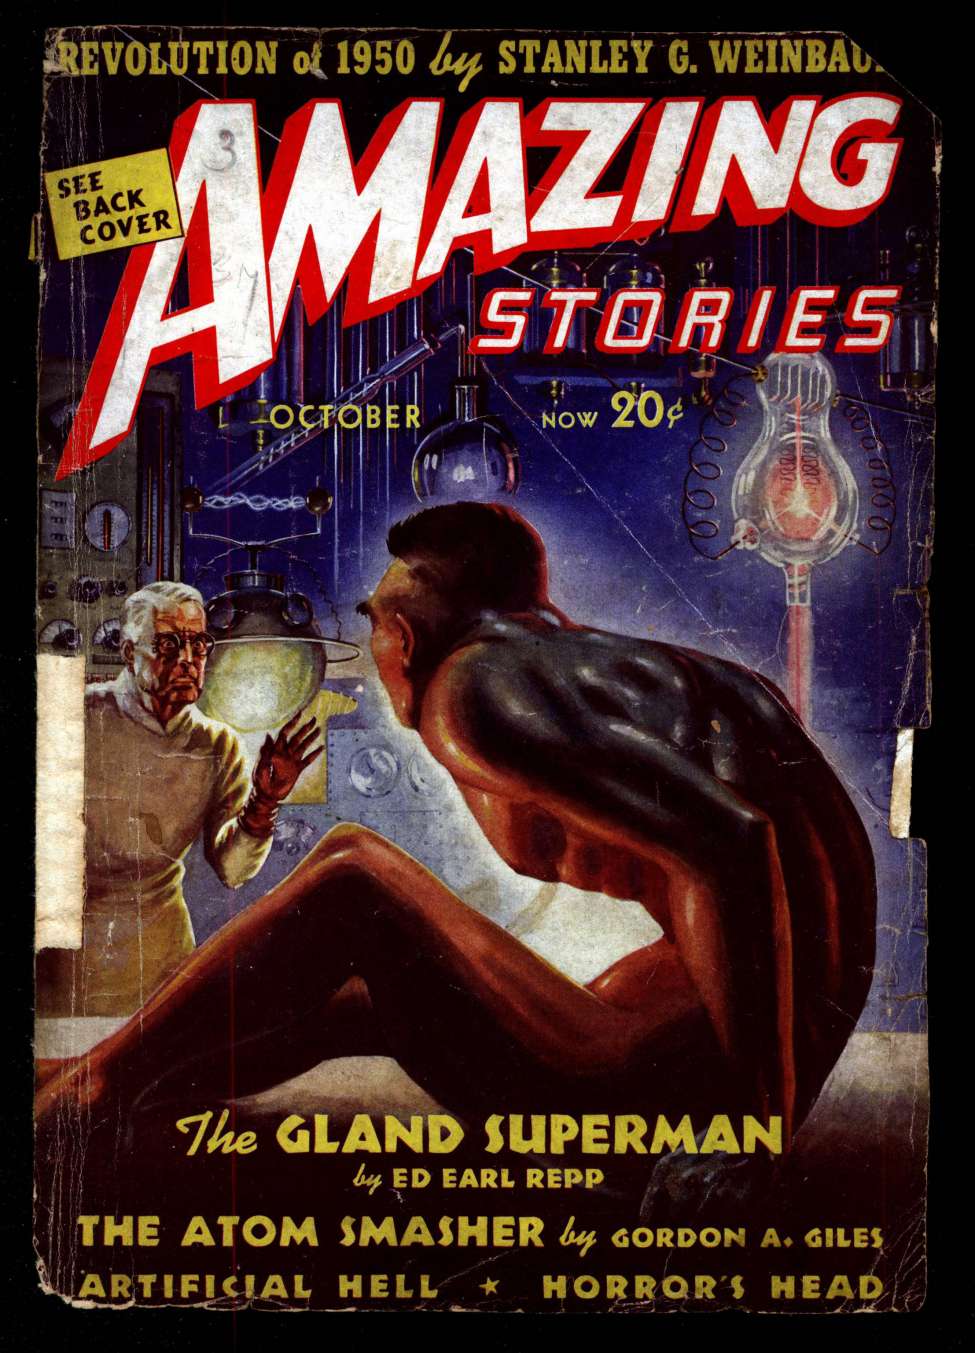 Book Cover For Amazing Stories v12 5 - The Gland Superman - Ed Earl Repp